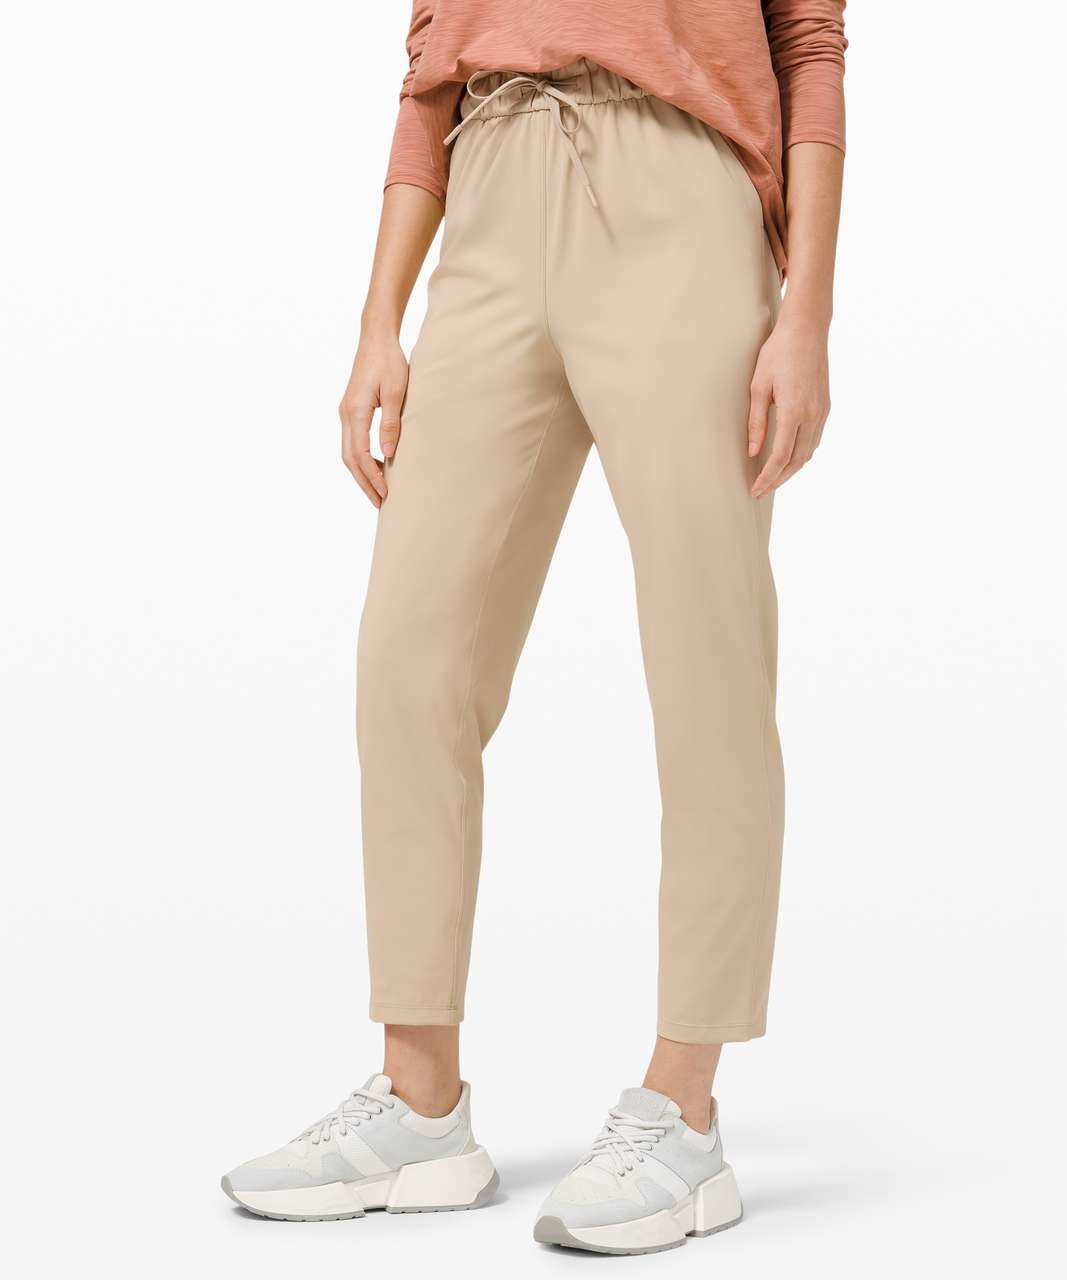 lululemon athletica, Pants & Jumpsuits, Lululemon Keep Moving High Rise  Workplace Casual Trousers